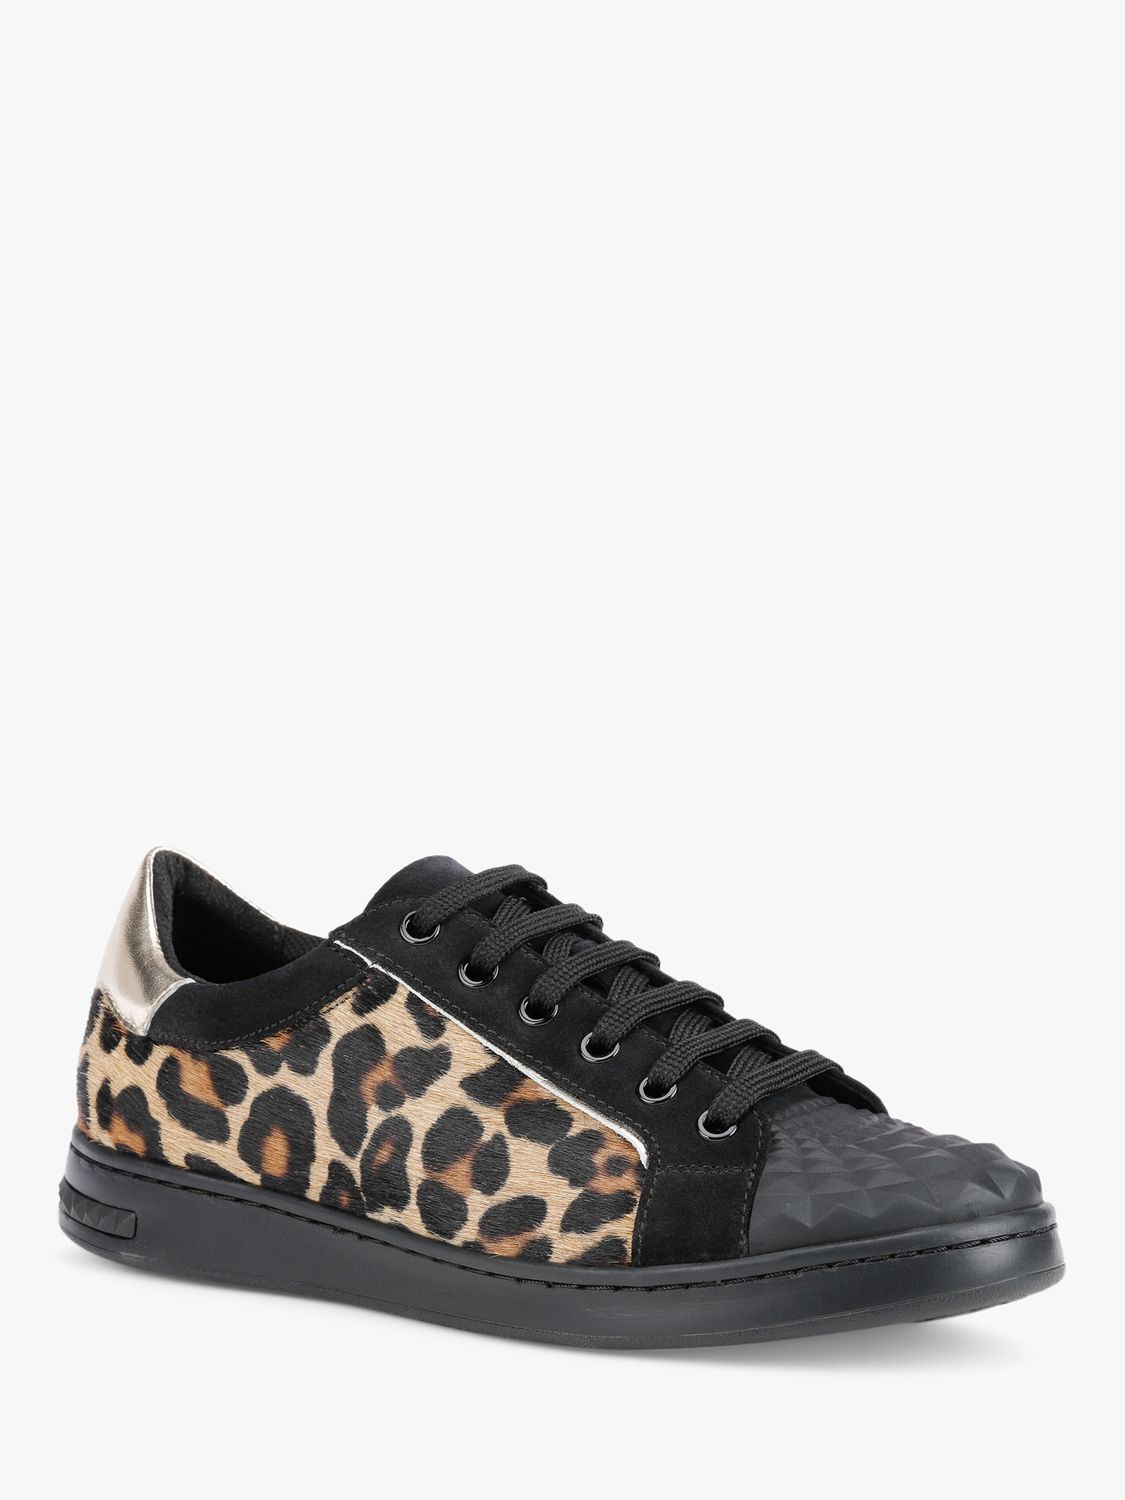 Geox Women's Jaysen Leather Leopard Lace Up Trainers, Sand/Black at ...